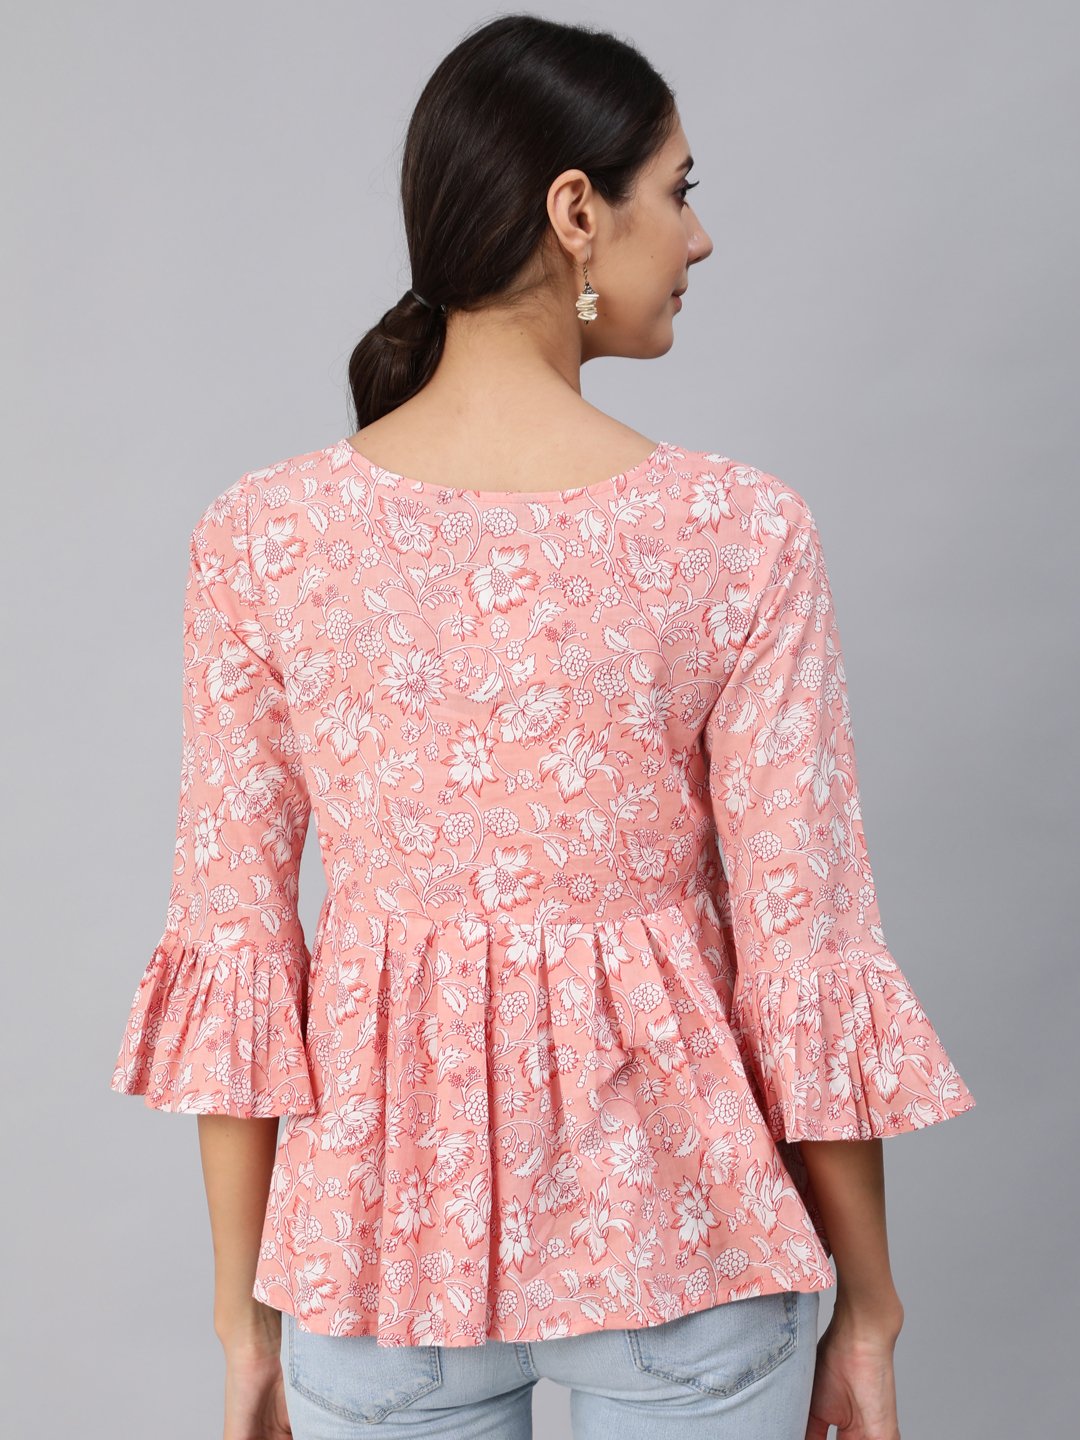 Women's Pink Floral Printed Top With Three Quarter Flared Sleeves - Nayo Clothing